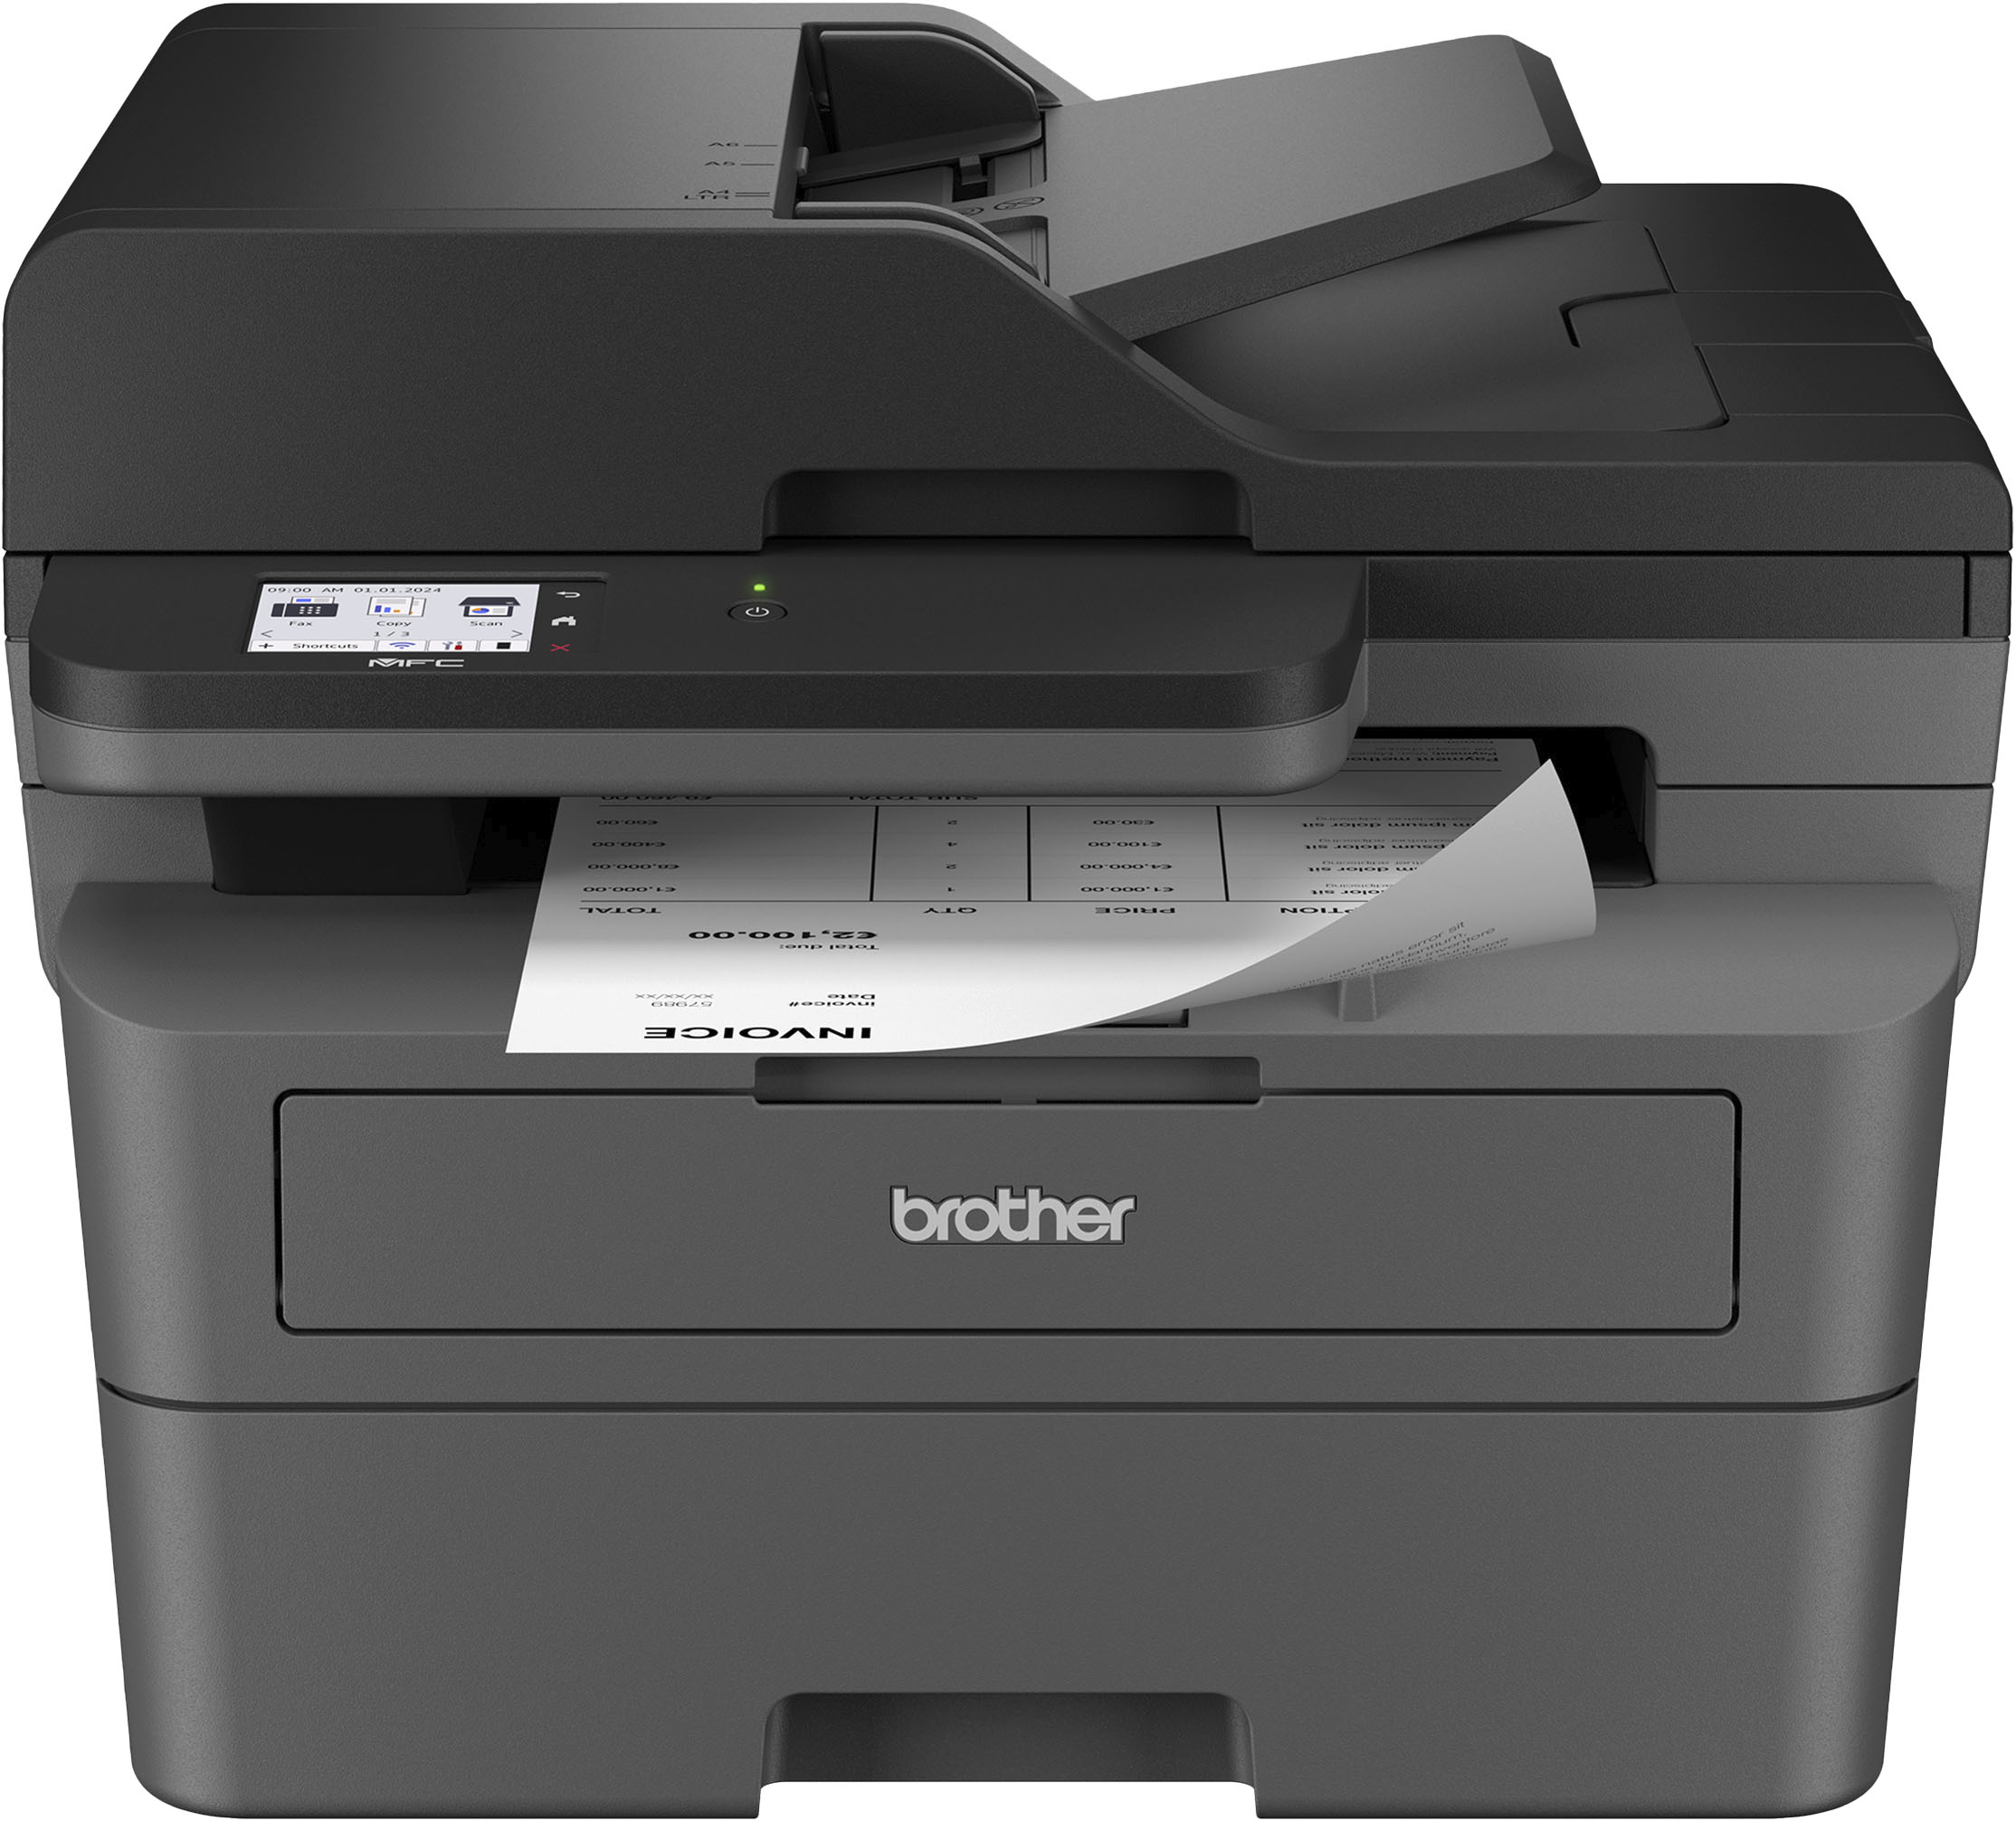 Brother MFC-L2750DW Compact Laser All-in-One Printer w/ Single